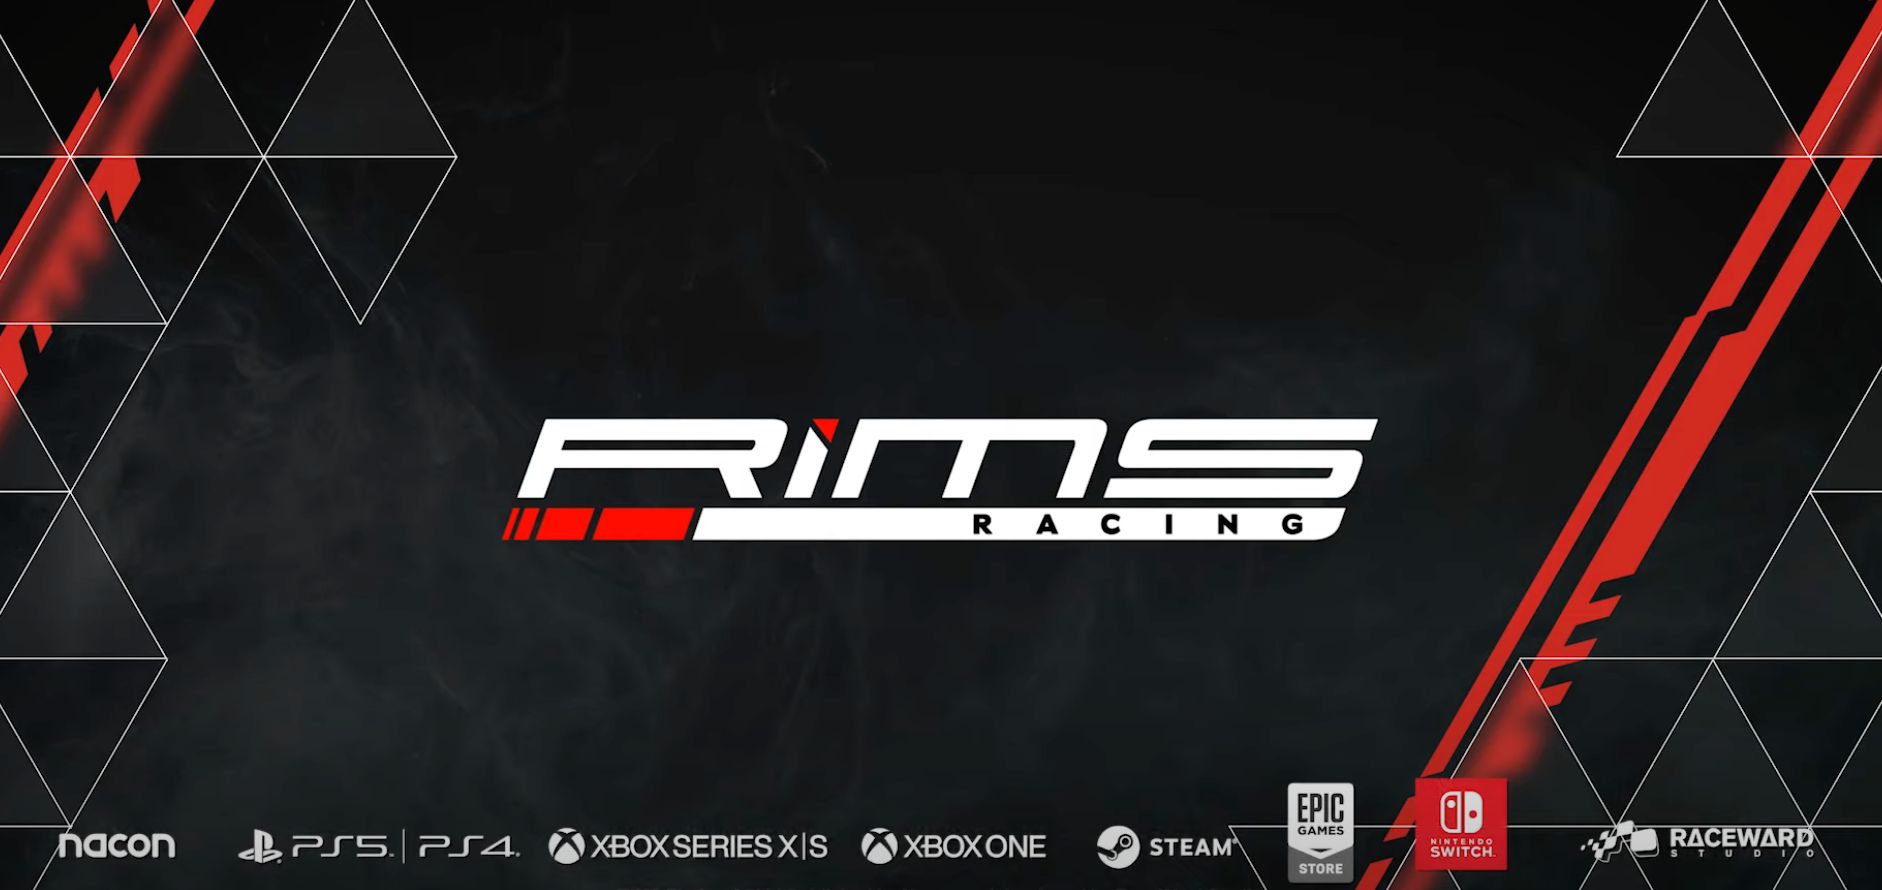 A screenshot from the end of the RiMS Racing trailer.